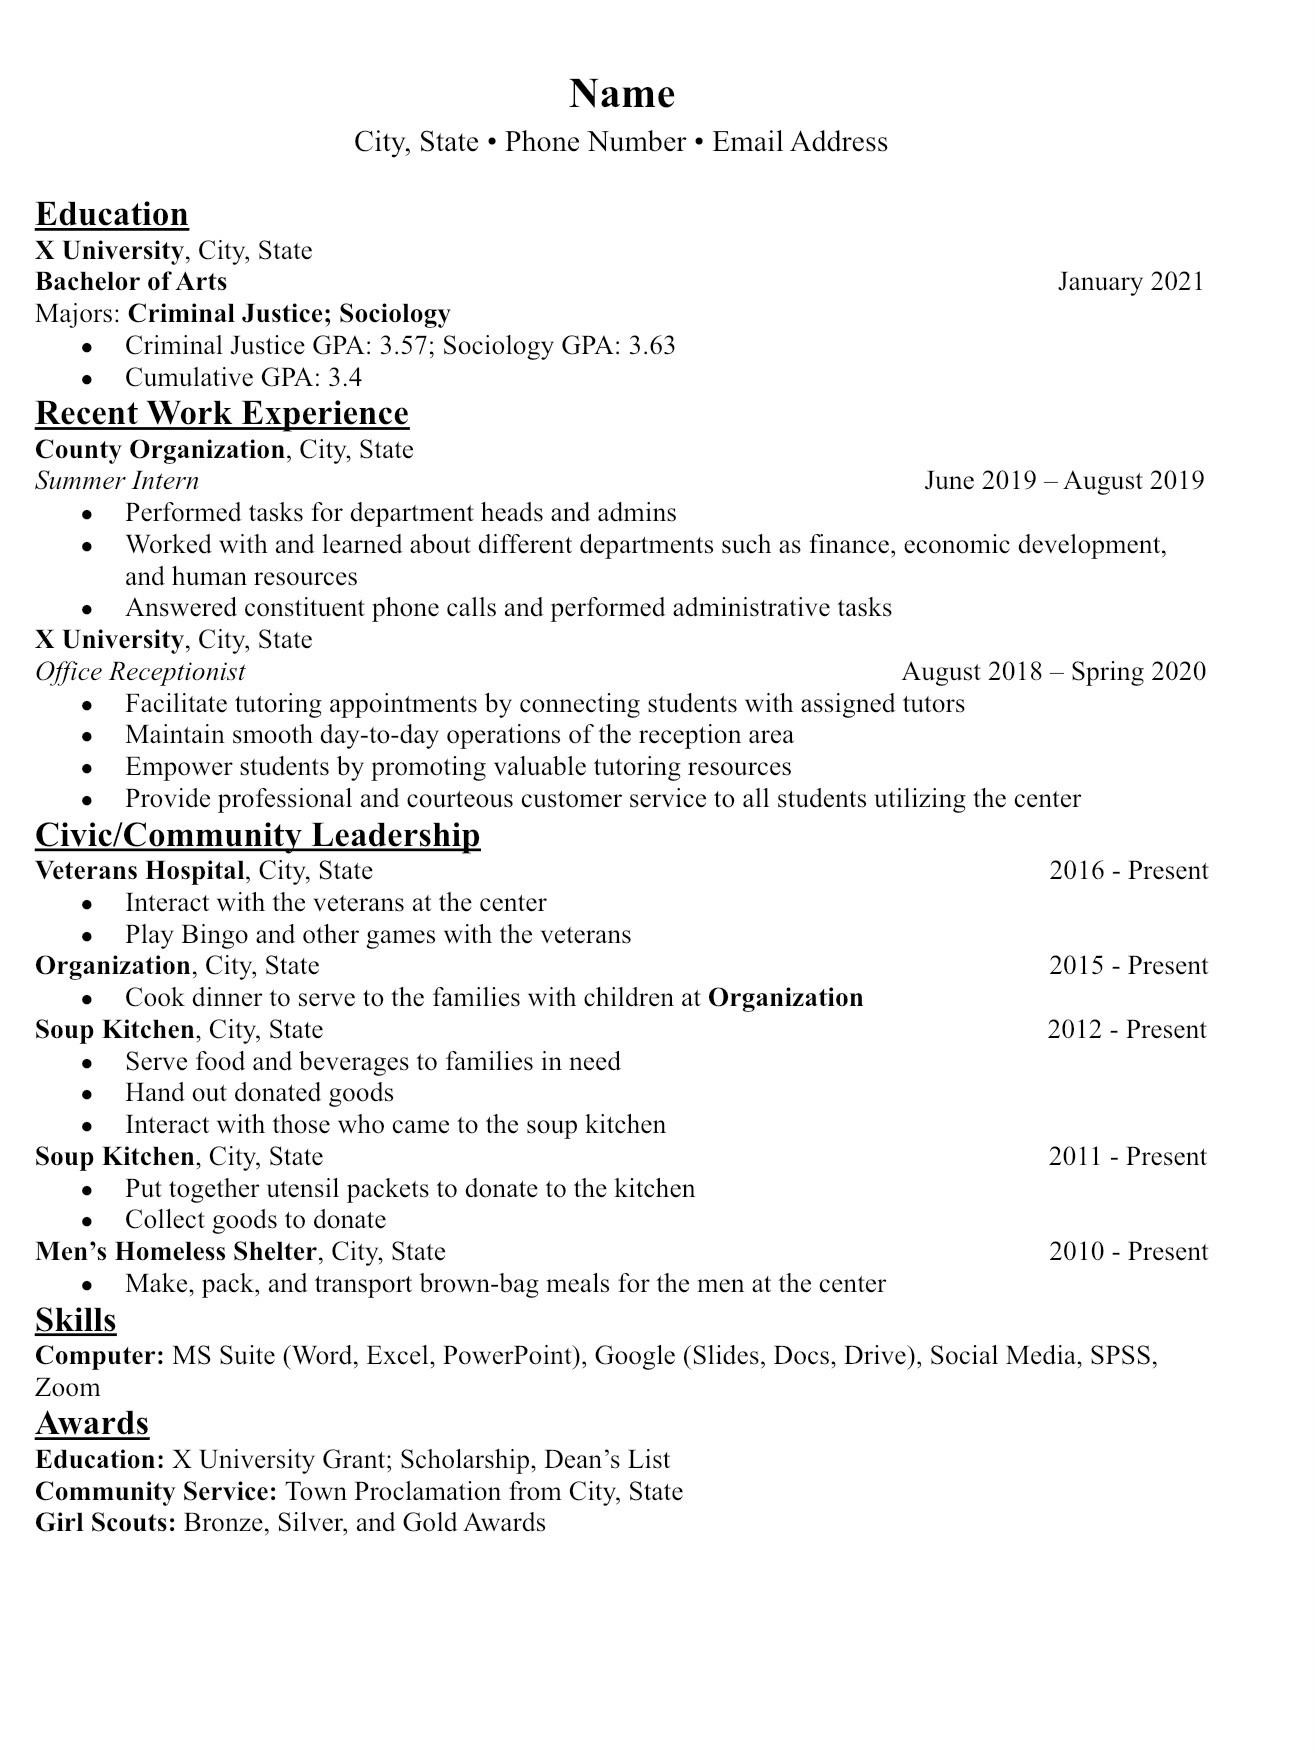 Newly Graduate In Criminal Justice Resume Sample Recent Graduate with A Ba In Criminal Justice and sociology …